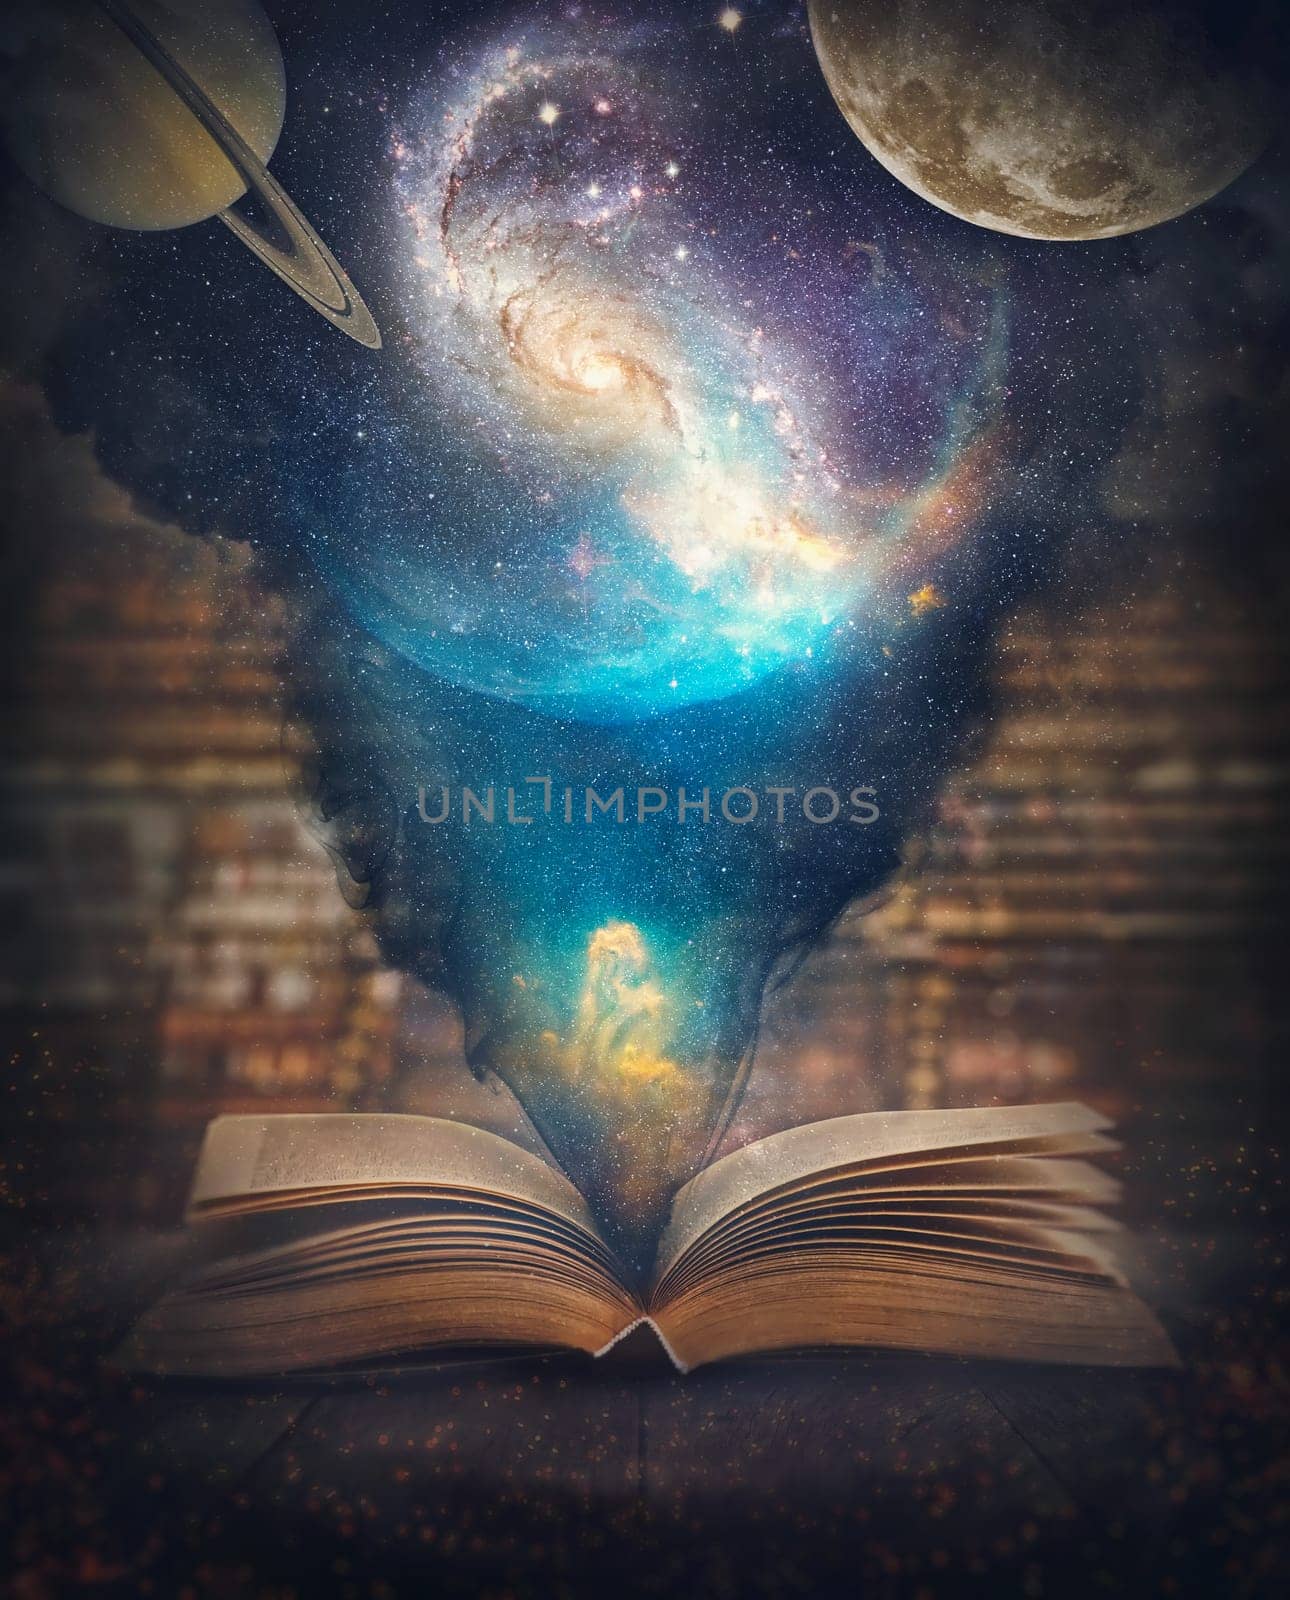 The world and universe inside a book surreal background. Educational and science concept with a magical open textbook casting a cosmic scene with galaxies, stars and planets. Inspirational storybook